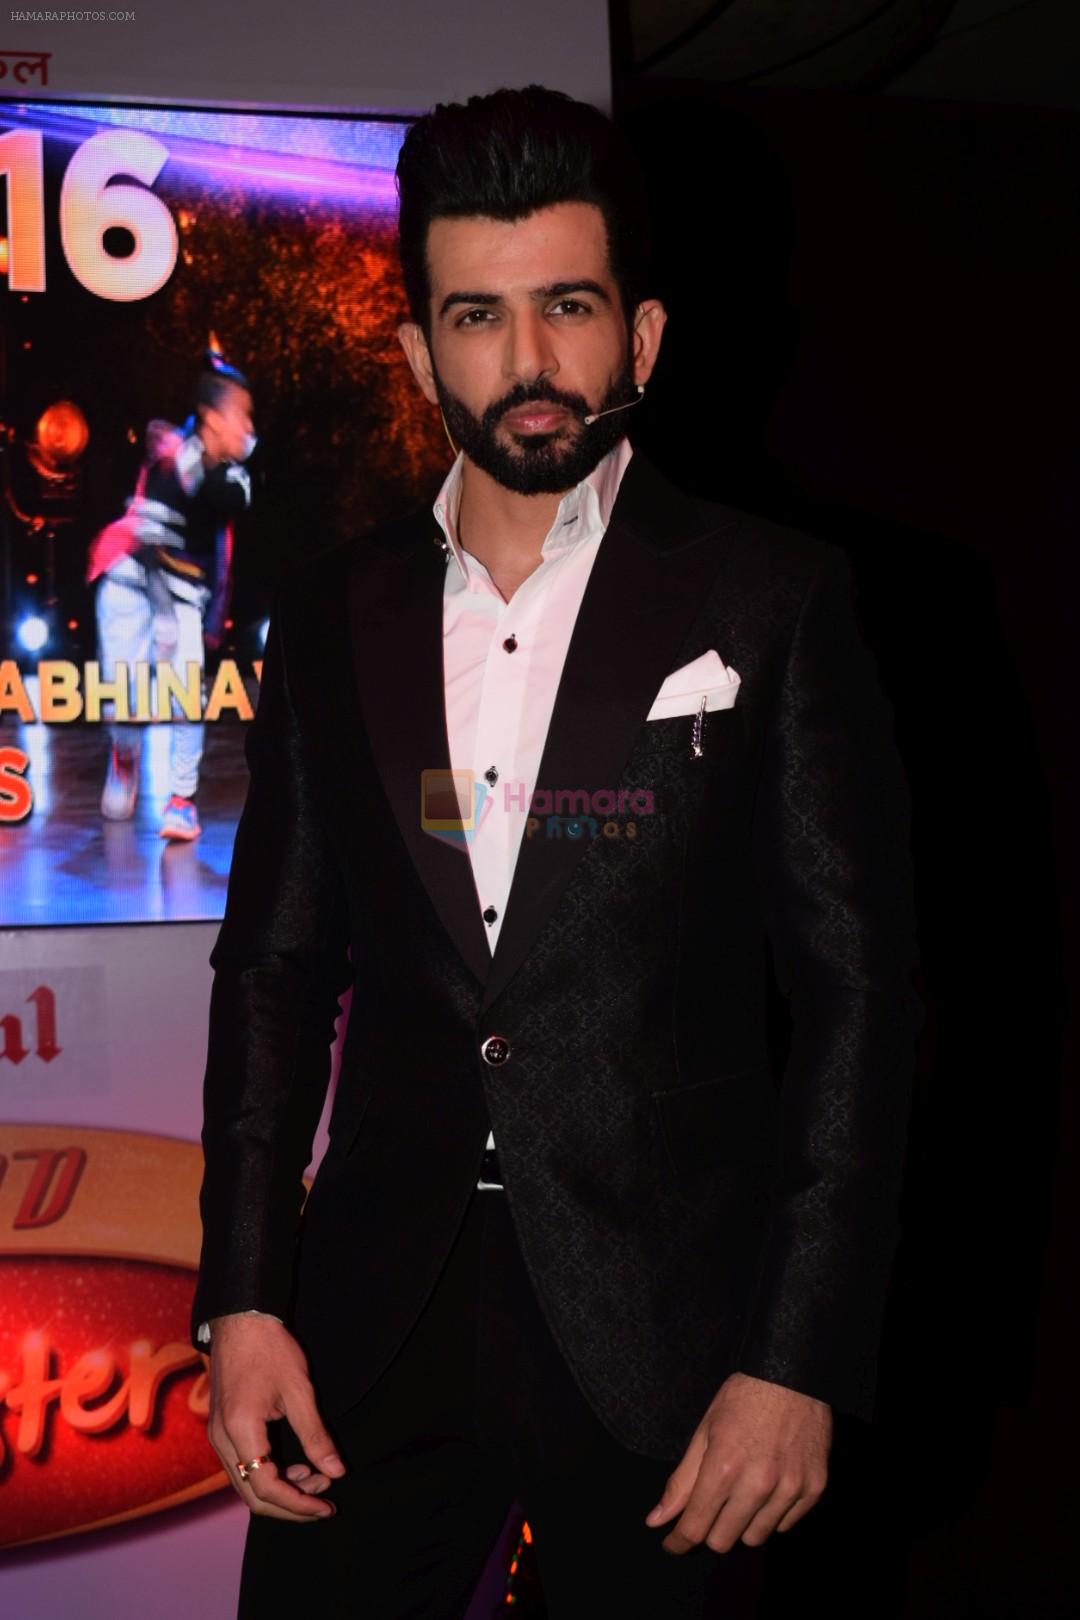 Jay Bhanushali at the press conference of Dance India Dance Li_l Masters on 13th March 2018